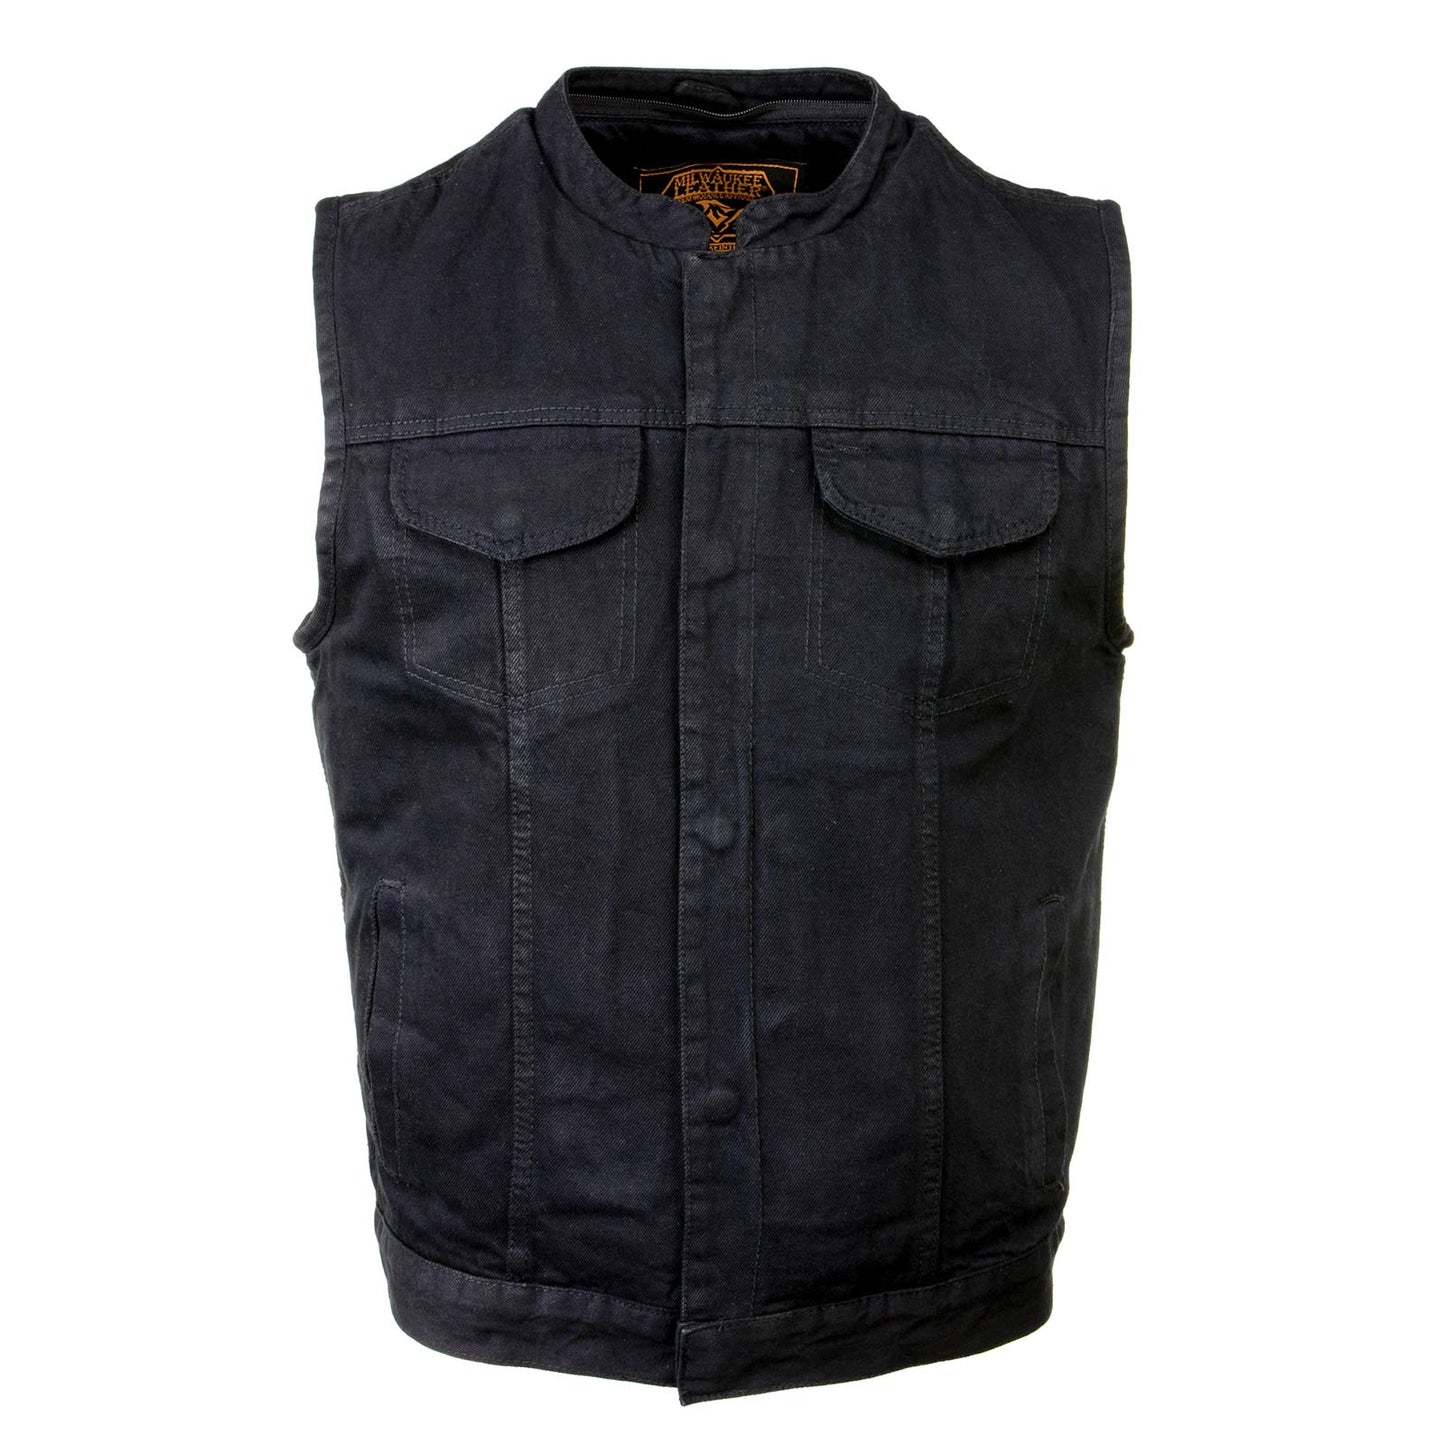 Milwaukee Leather MDM3015 Men's 'Rustic' Black Denim Motorcycle Riding Vest with Hoodie and Quick Draw Pocket